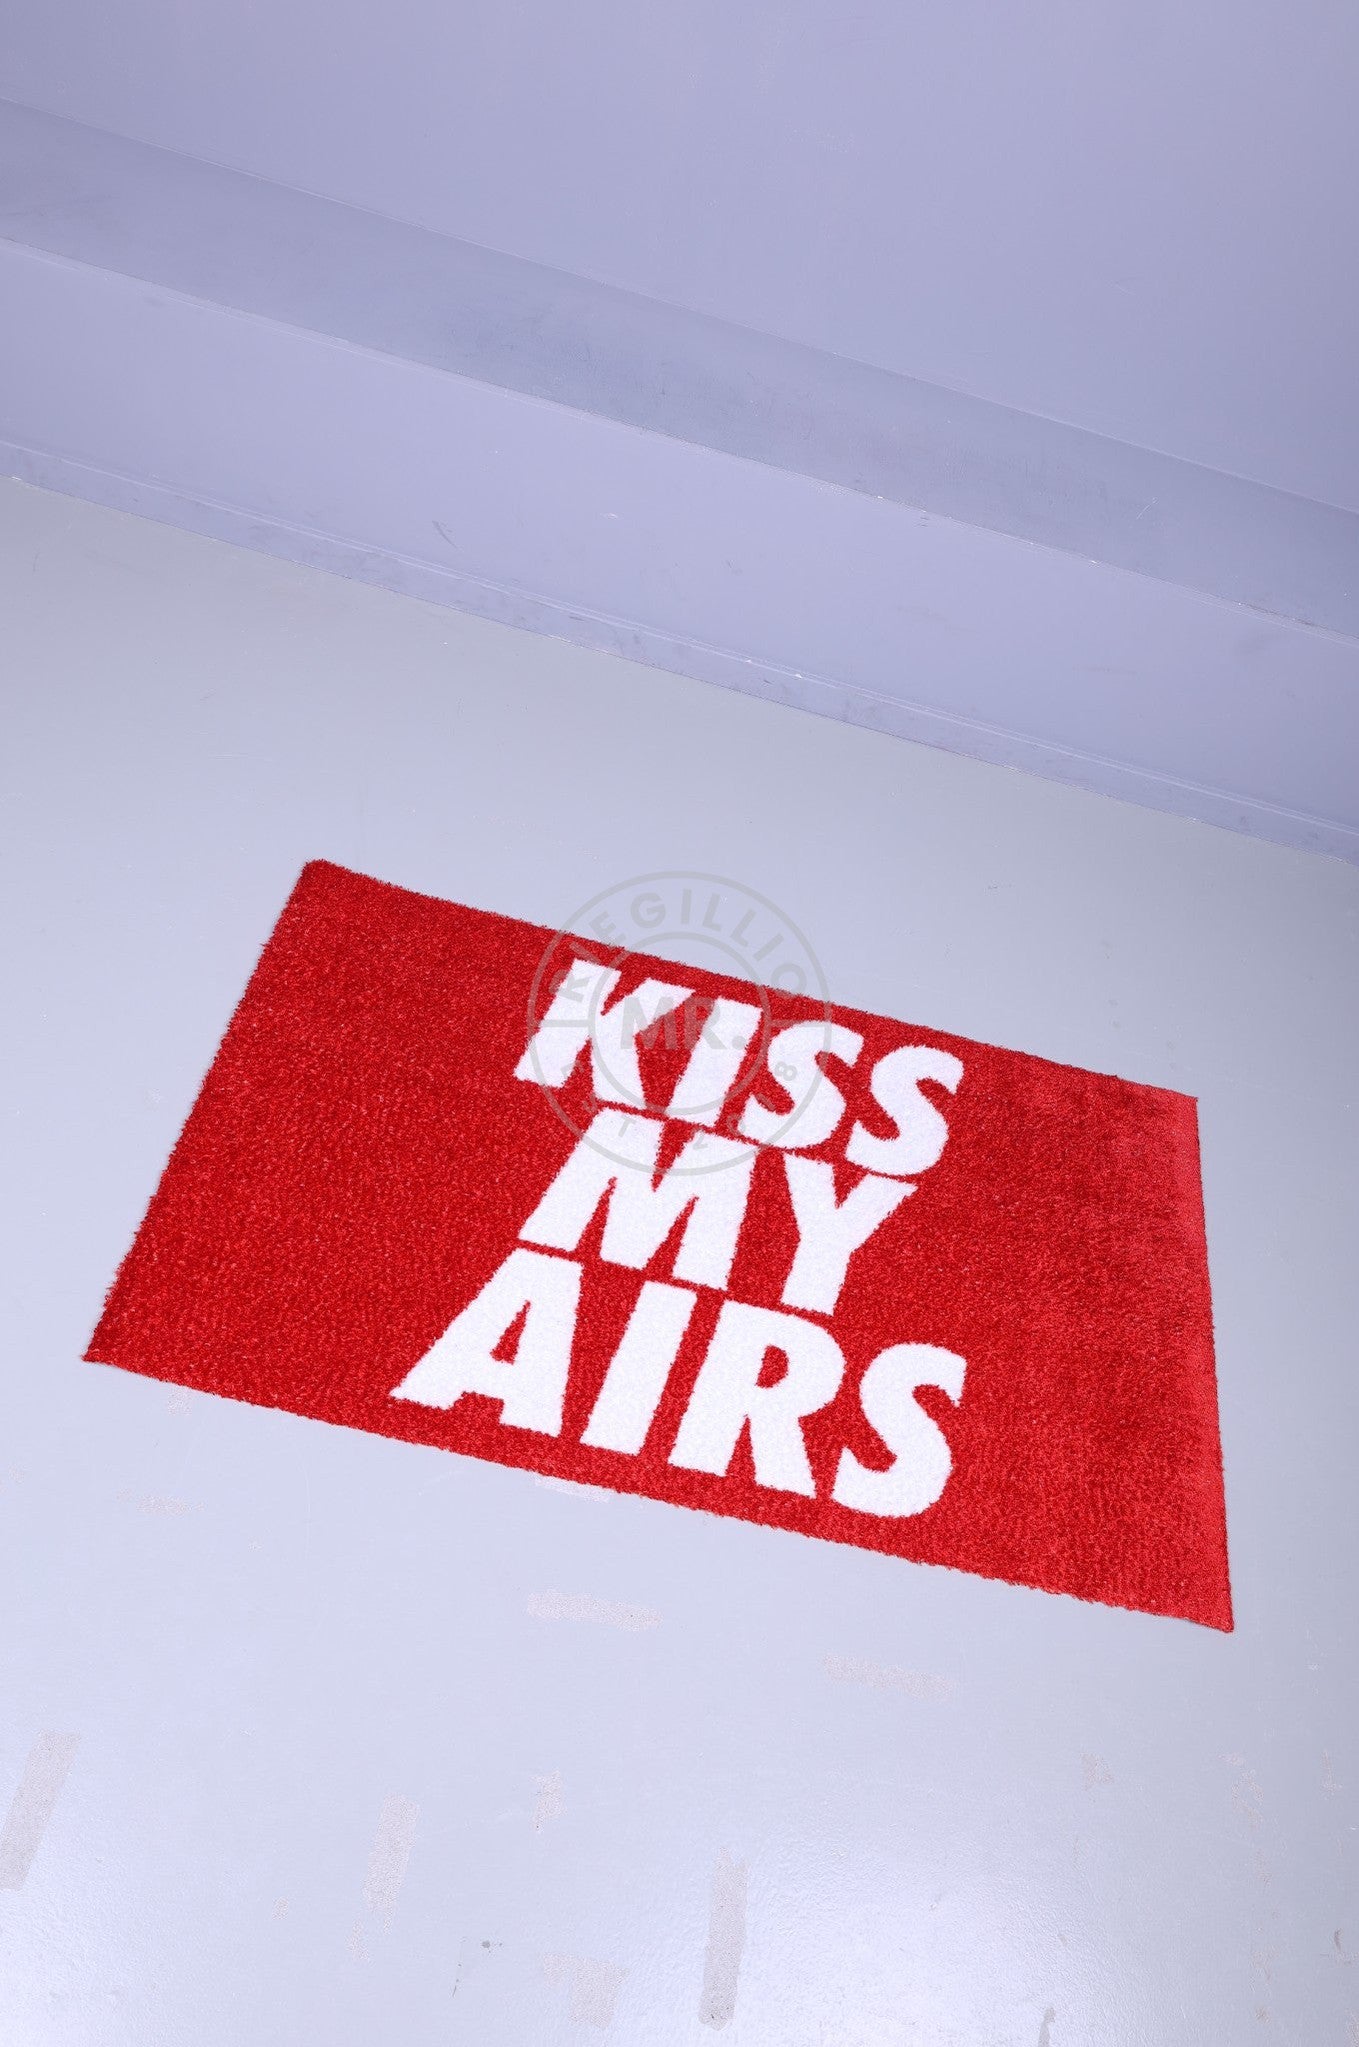 Doormat - KISS MY AIRS - Red